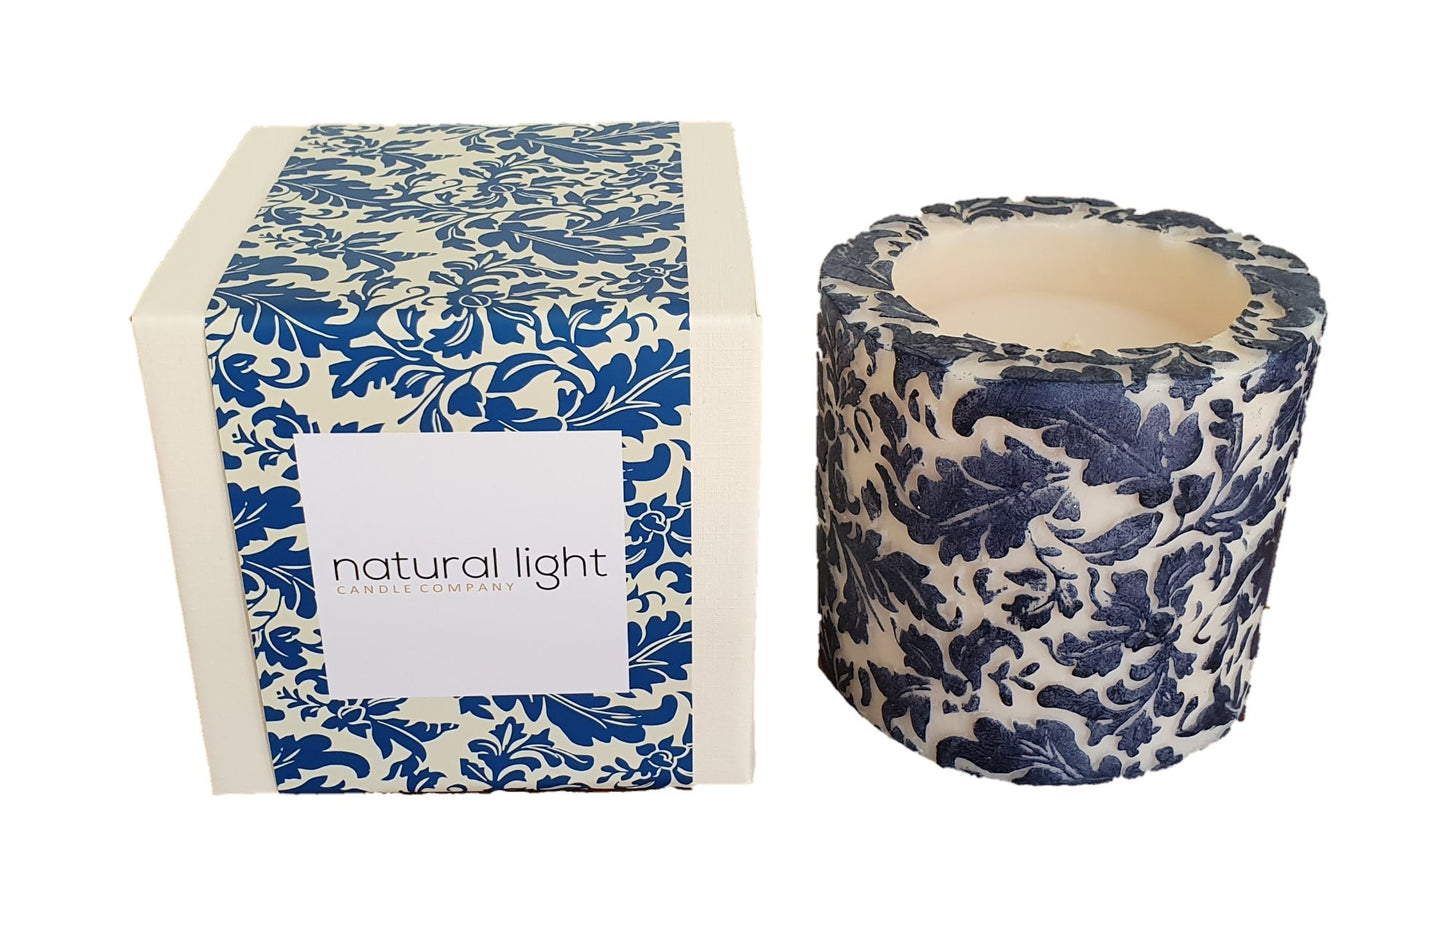 Natural Lights - Damask Leaf 4” Recessed Pillar Candle - White & Tattoo Blue